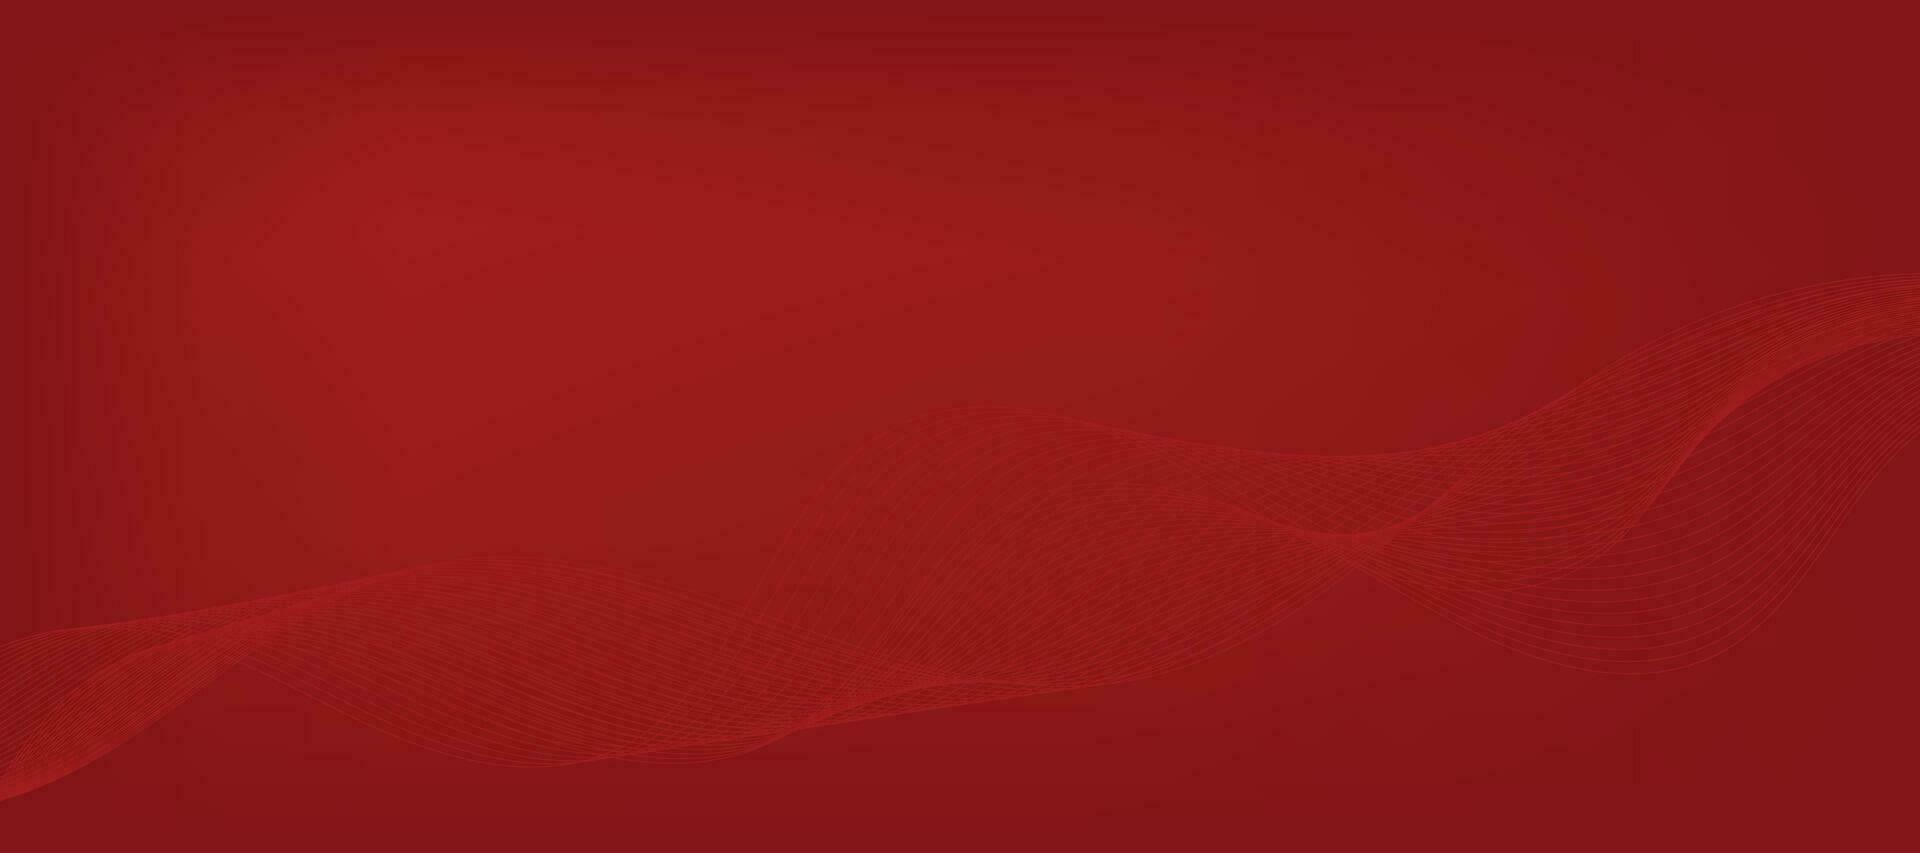 Abstract red gradient background with wavy lines vector